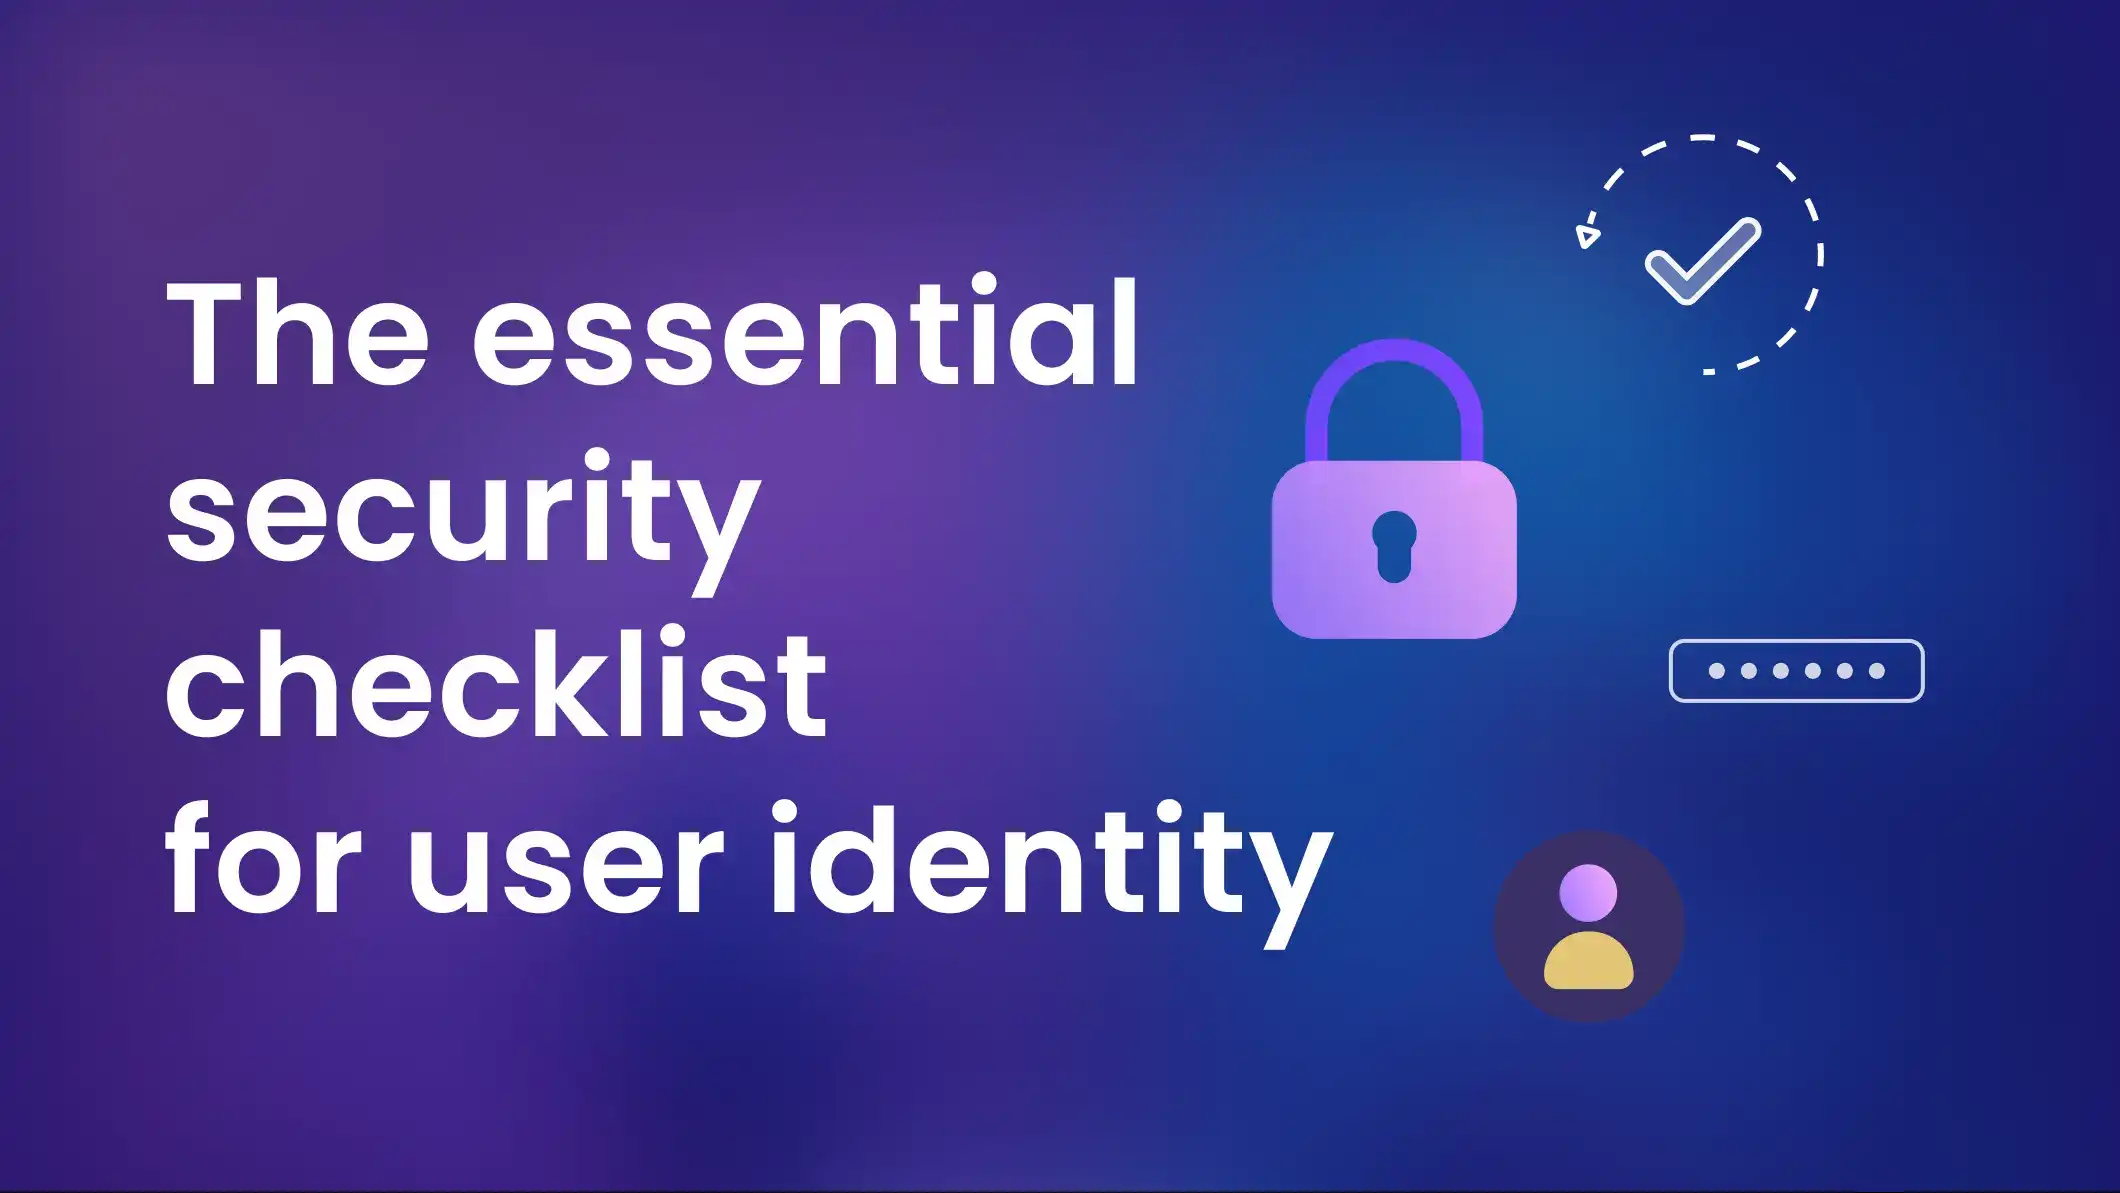 The essential security checklist for user identity